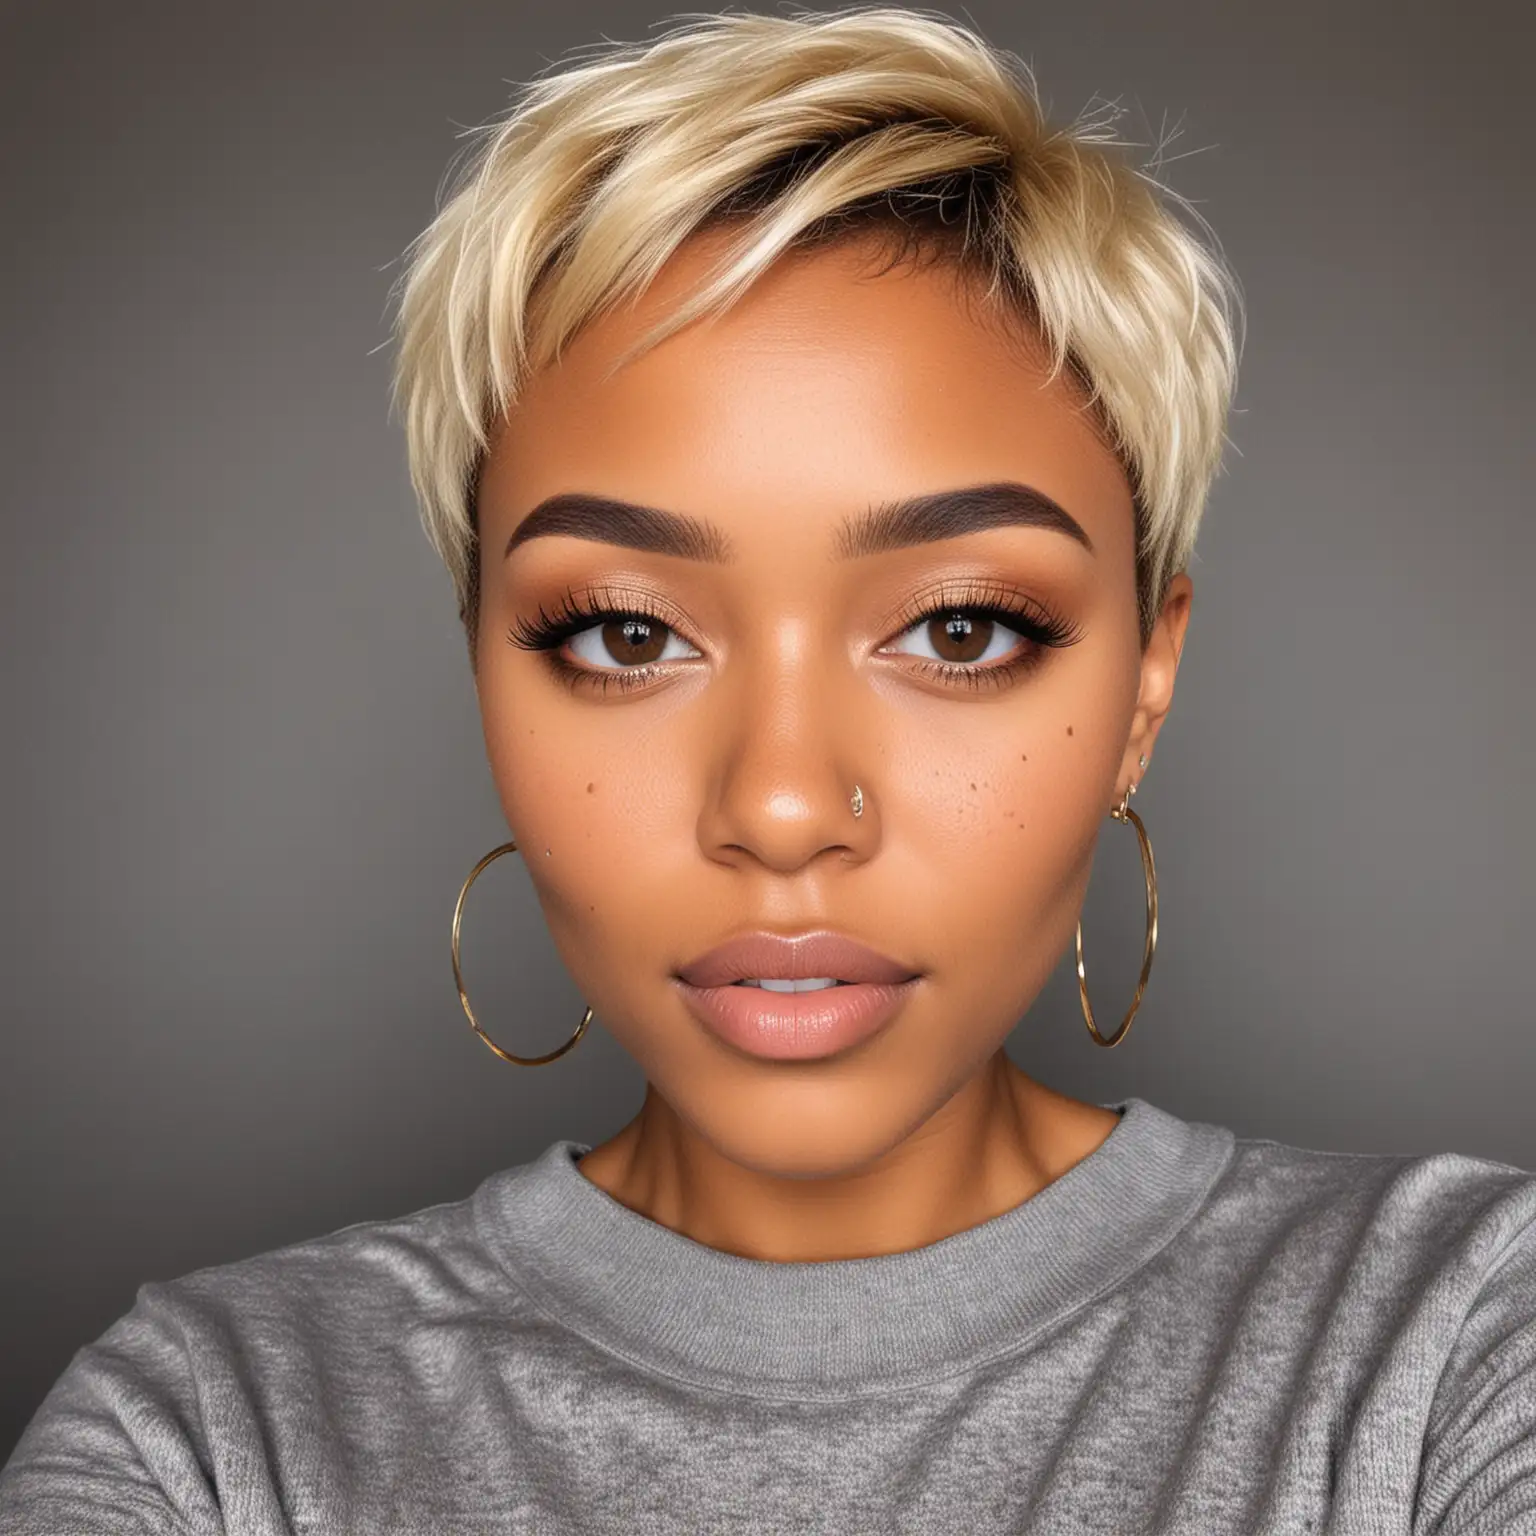 create image of light skin black lady with gray eyes, honey blonde hair in pixie cut, freckles



